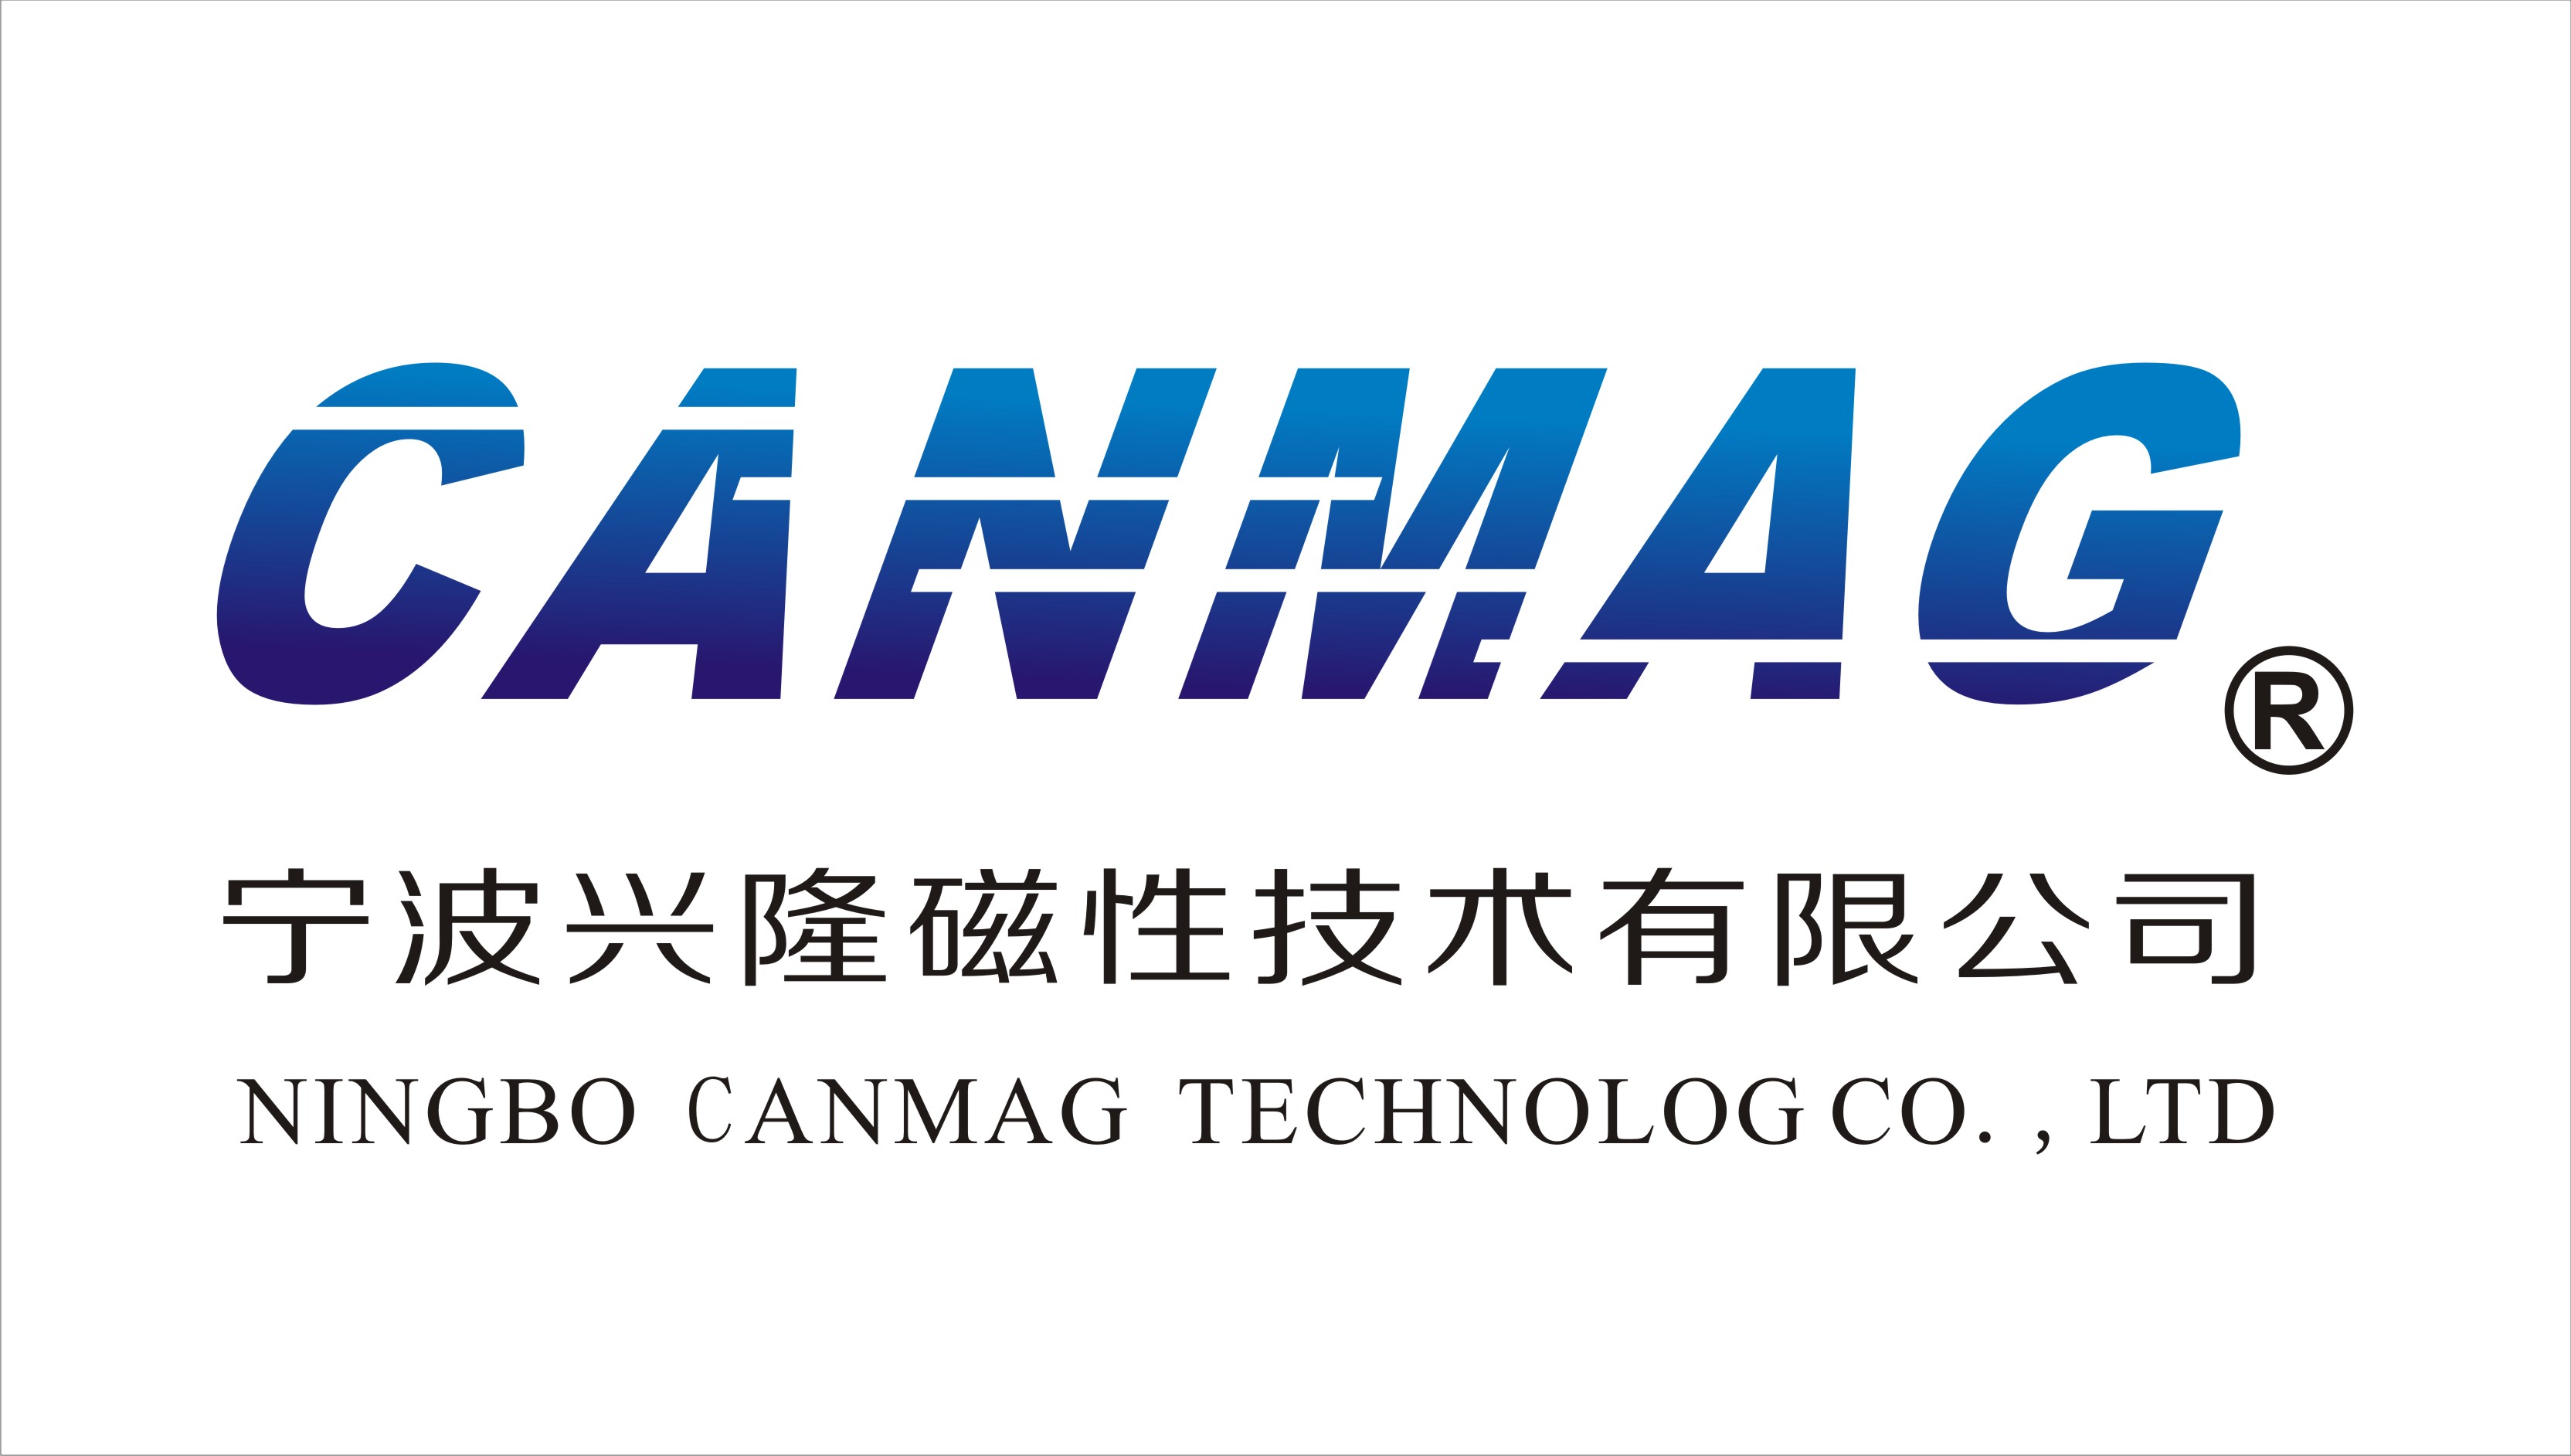 Ningbo Canmag Technology Co.,Ltd.